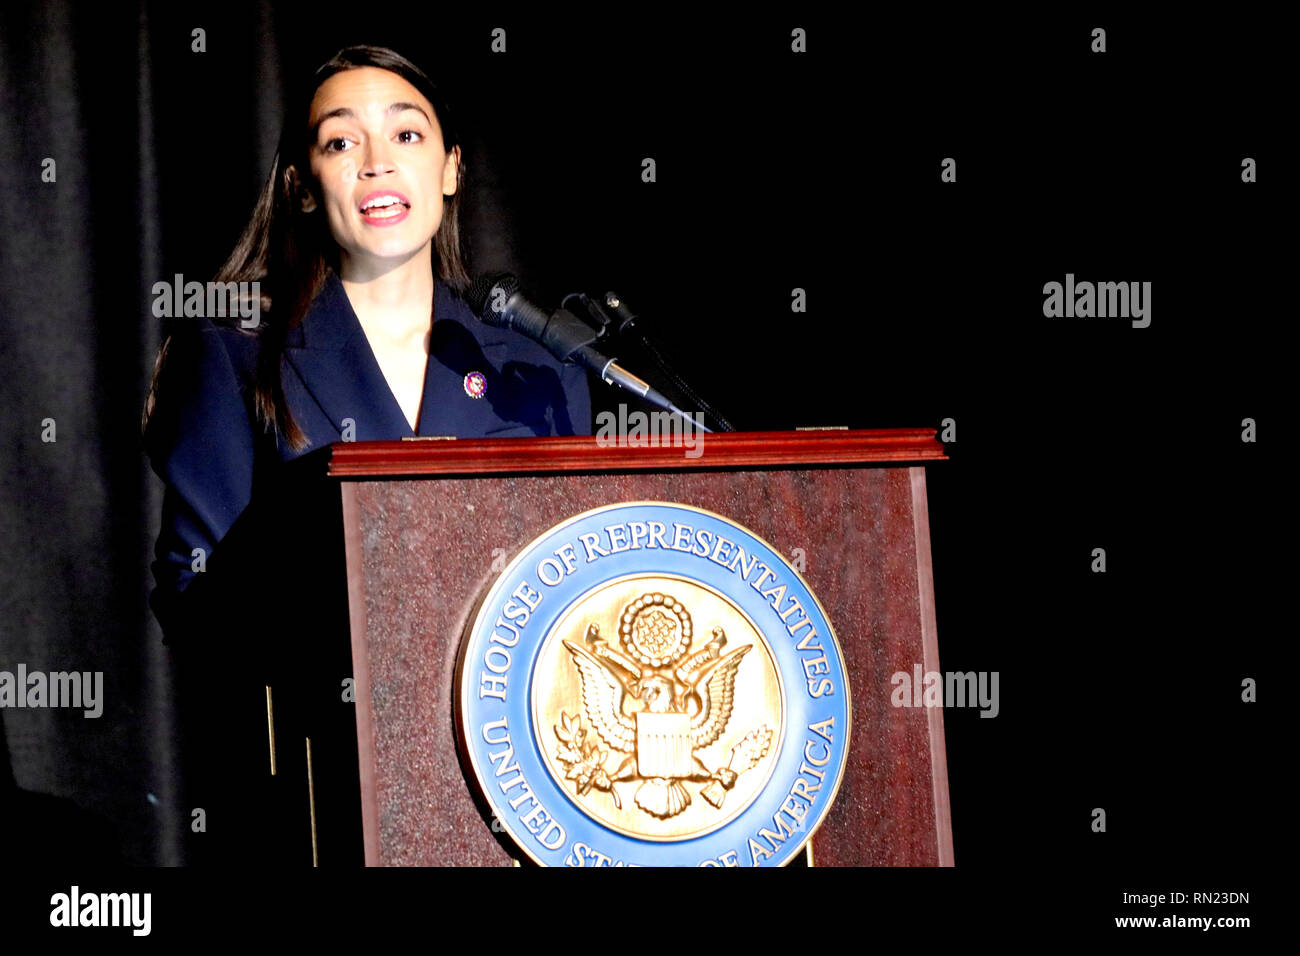 New York, NY, USA.  16th Feb, 2019. Freshman U.S. Congresswoman Alexandria Ocasio-Cortez (D-NY) has delivered her inaugural address in her Bronx home district on 15 February 2019. The address was delayed because of the recent partial government shutdown. The ceremony featured a ceremonial swearing-in, an address to her constituents and featured speeches by local political leaders and massive display of support from her supporters. © 2019 G. Ronald Lopez/DigiPixsAgain.us/Alamy Live News Stock Photo